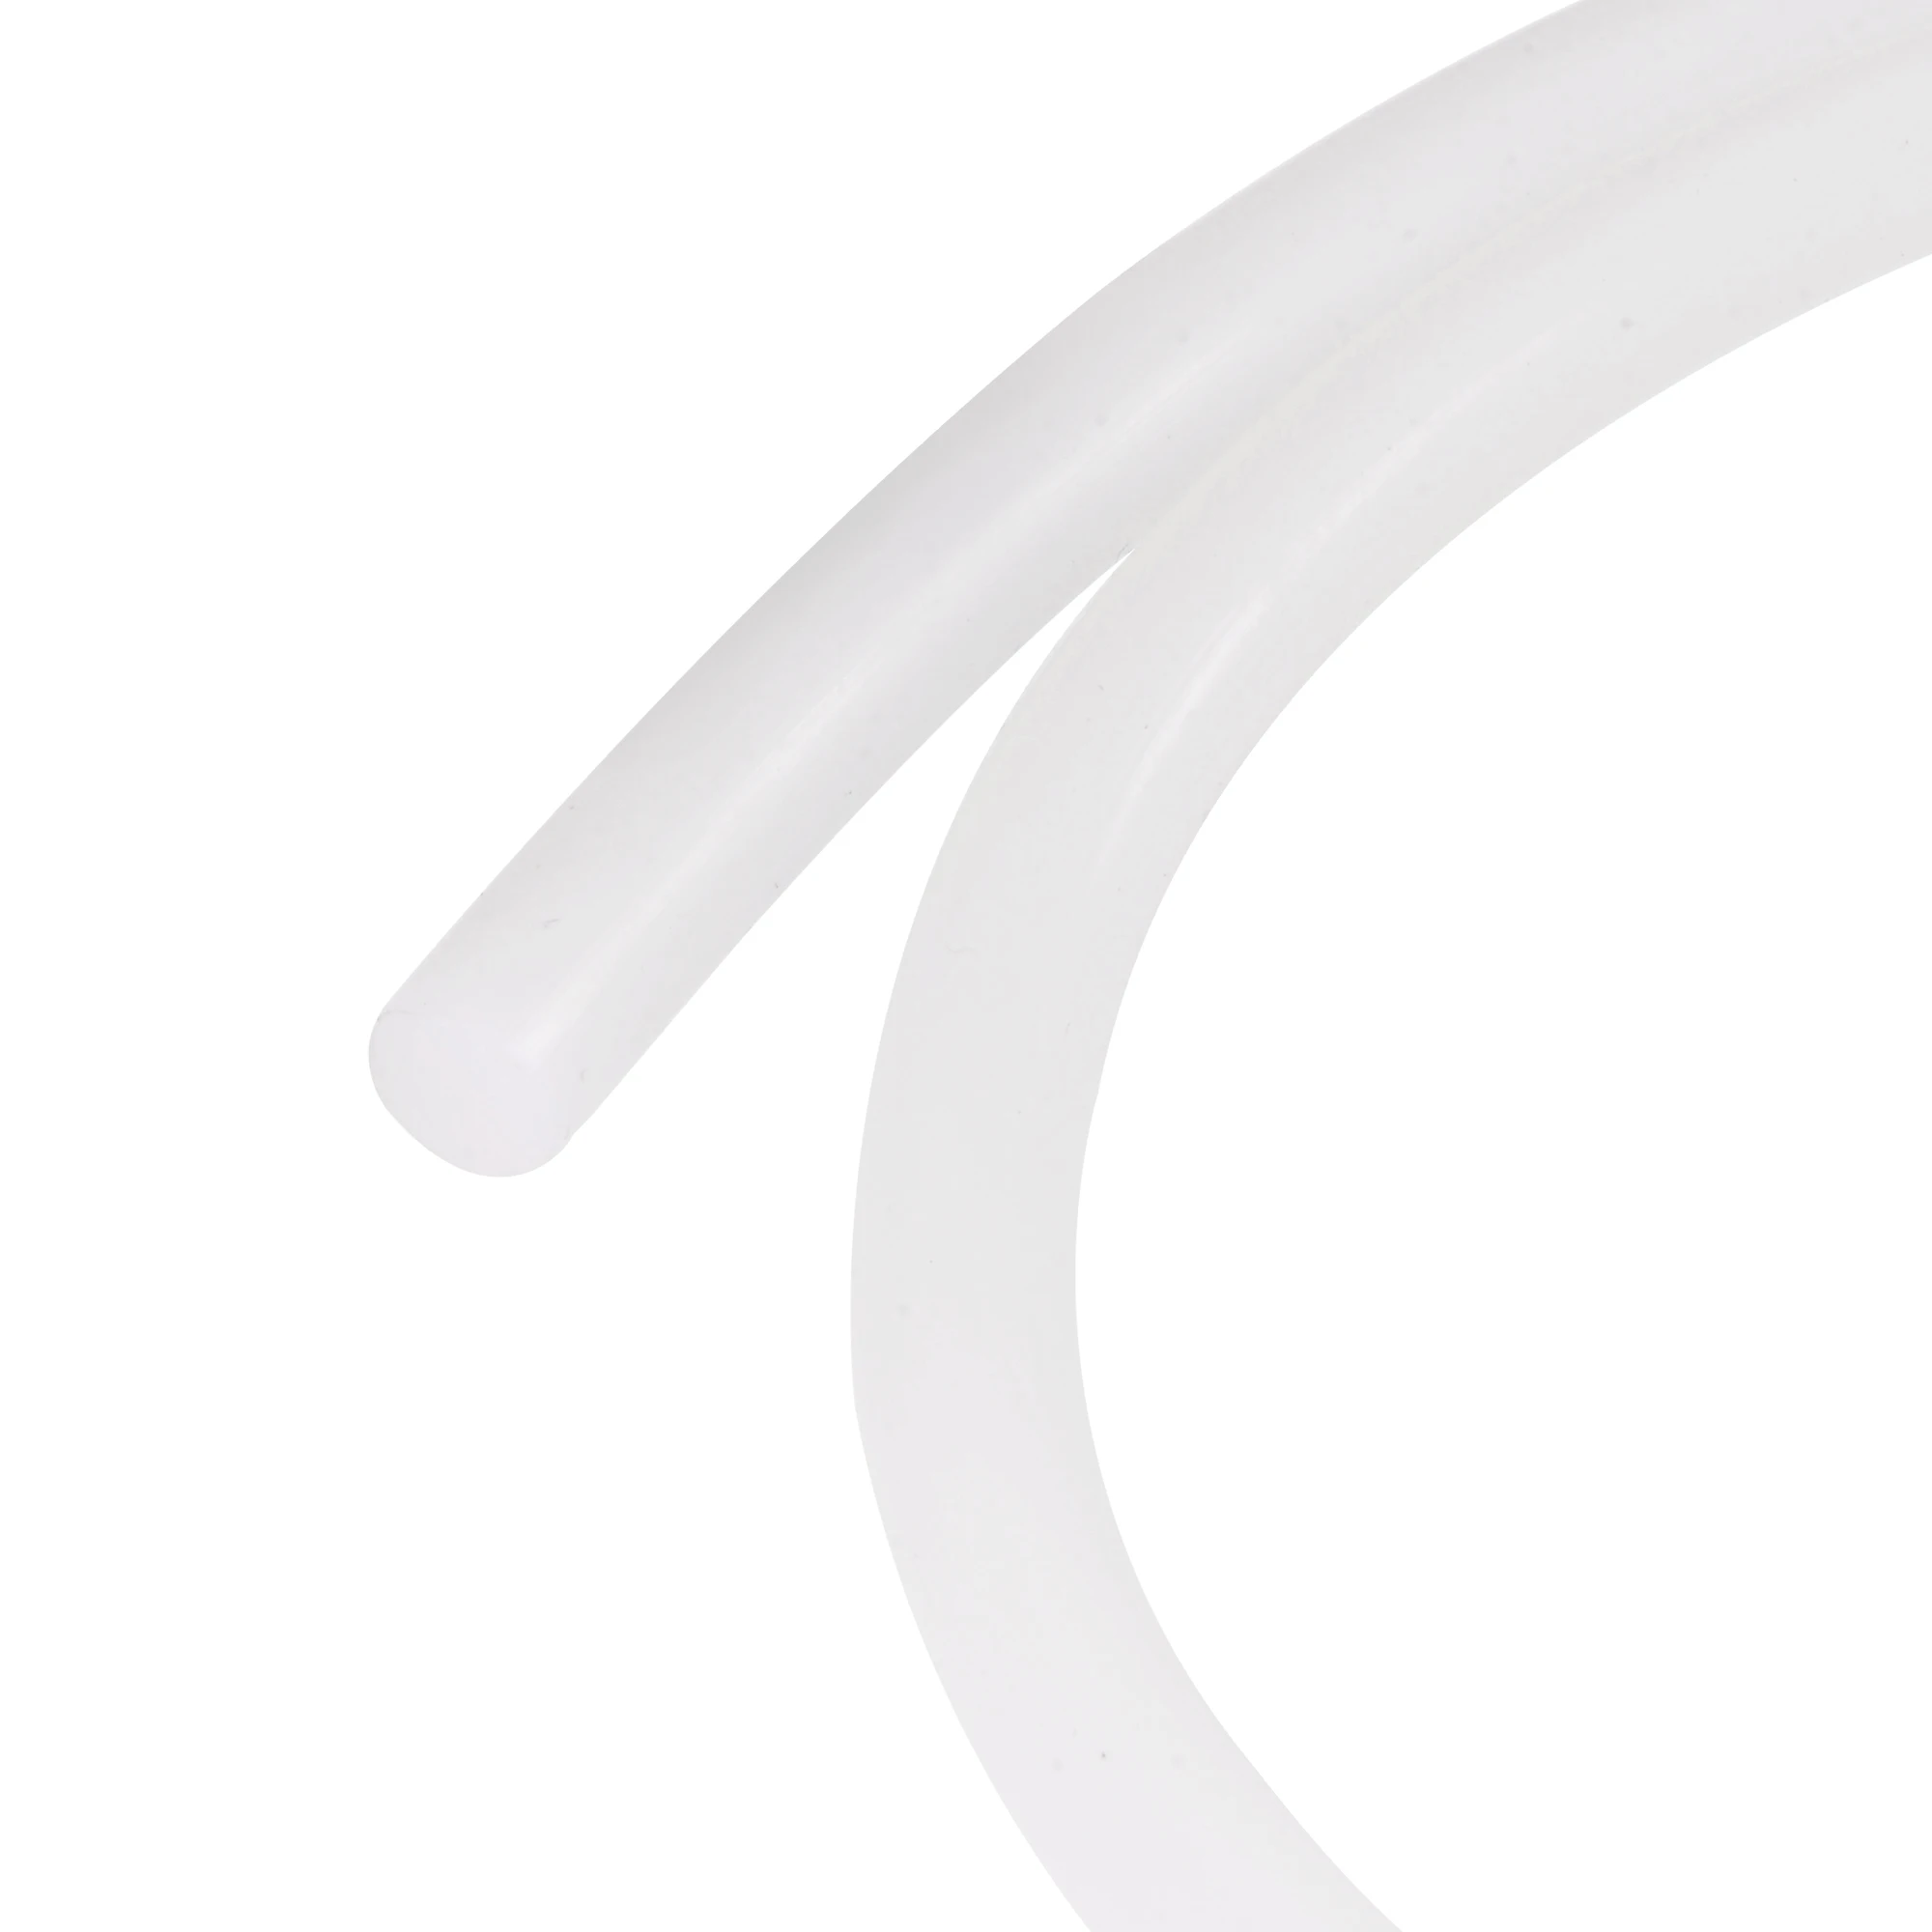 Uxcell Silicone Bending Insert Hard Tube 3/8 5ft White Soft for Rigid PETG Tubing Water Cooling uxcell acrylic pipe rigid round tube clear 9mm id 12mm od 305mm for lamps and lanterns water cooling system 2 pcs